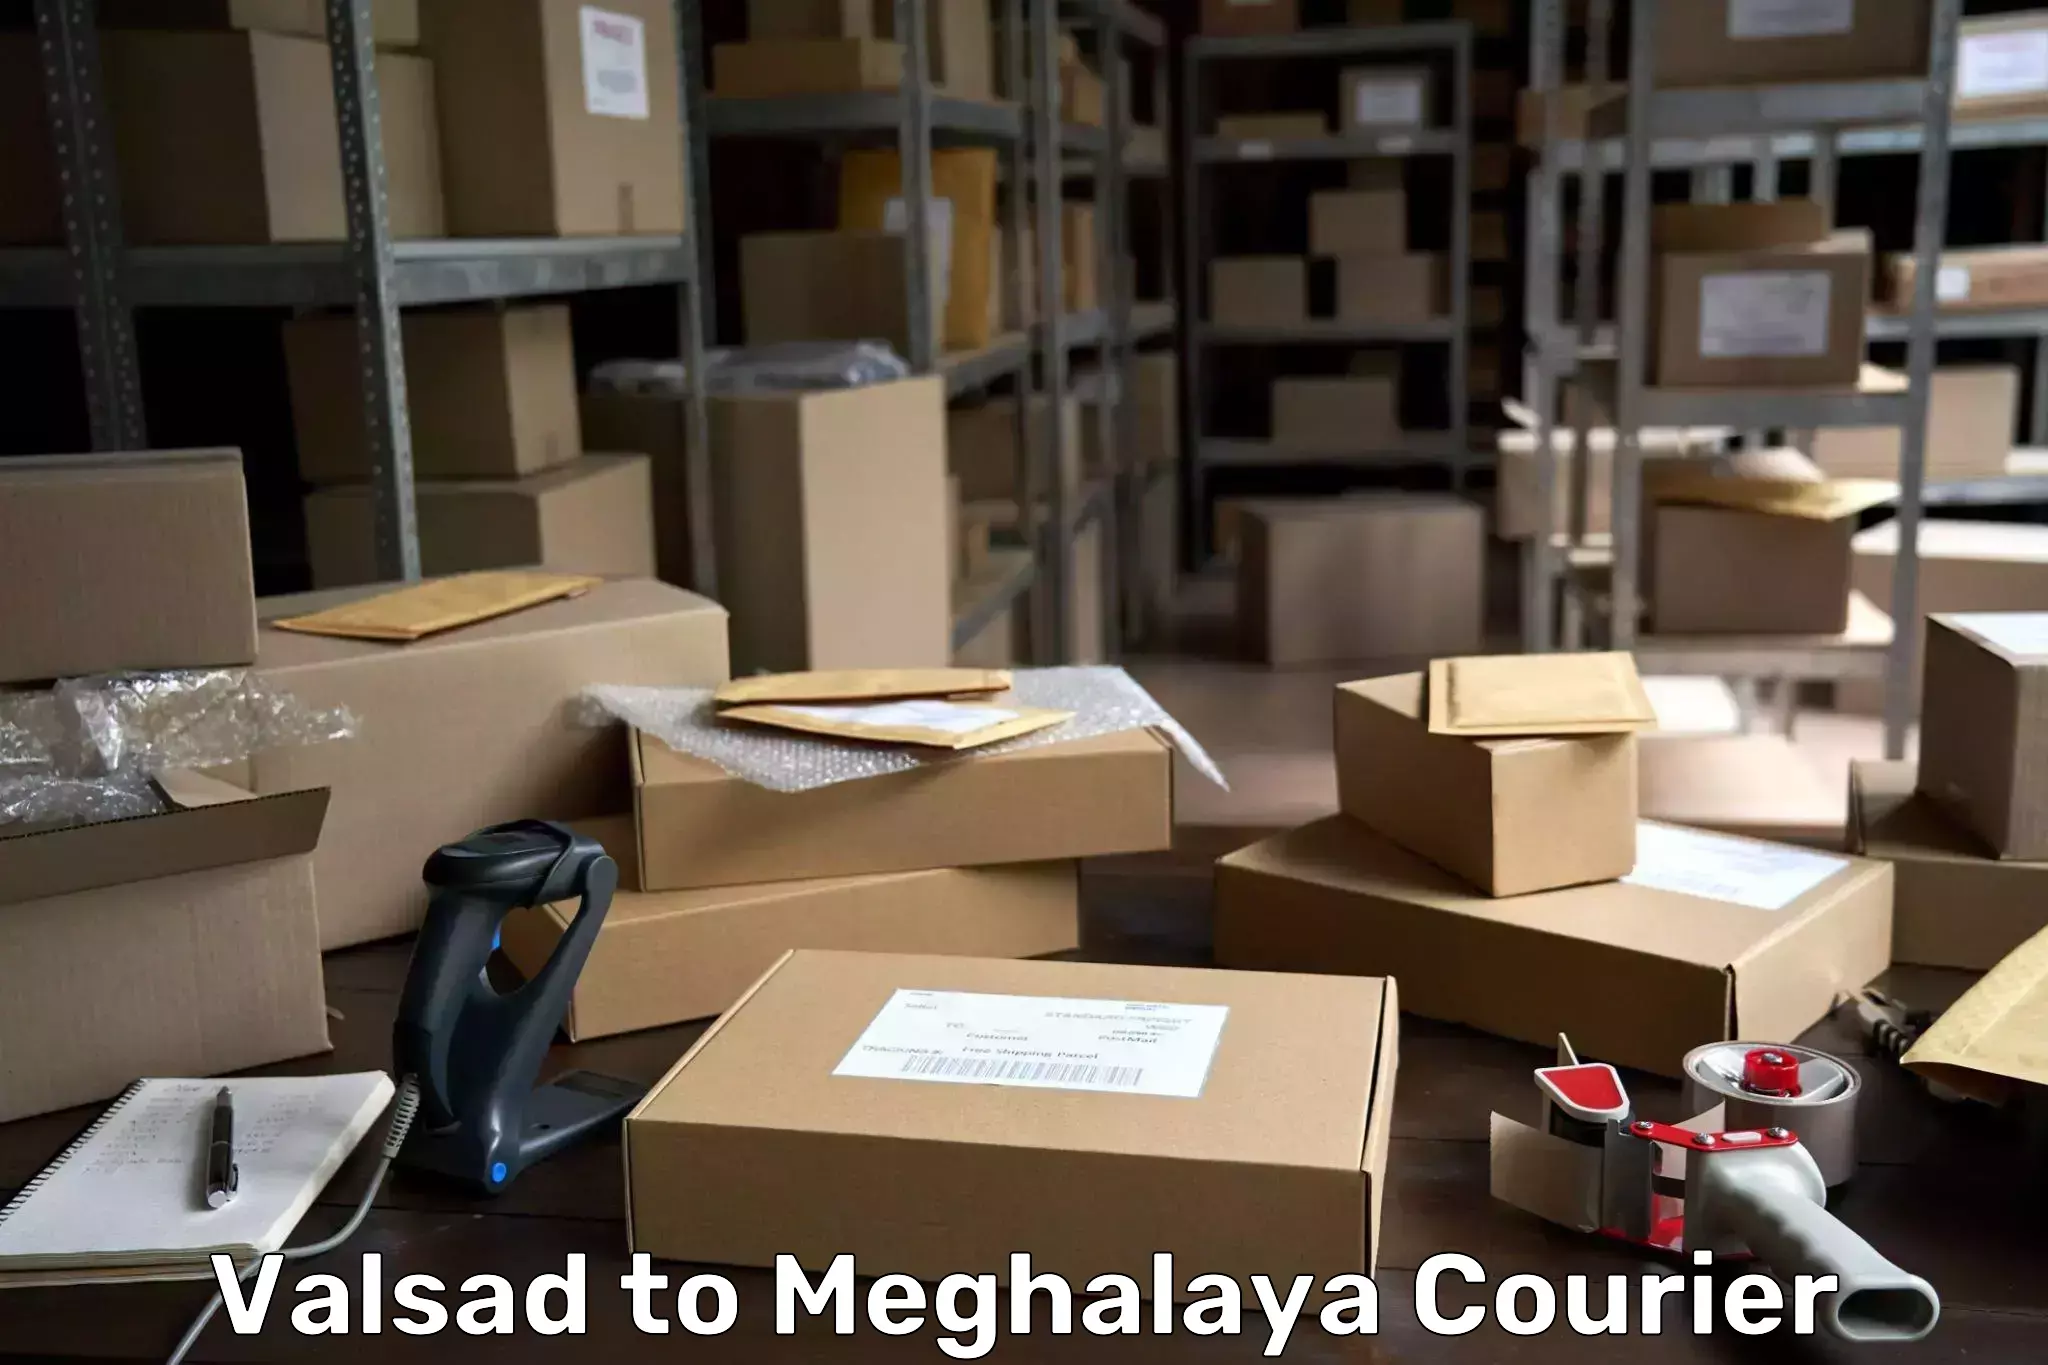 Full-service courier options Valsad to Meghalaya